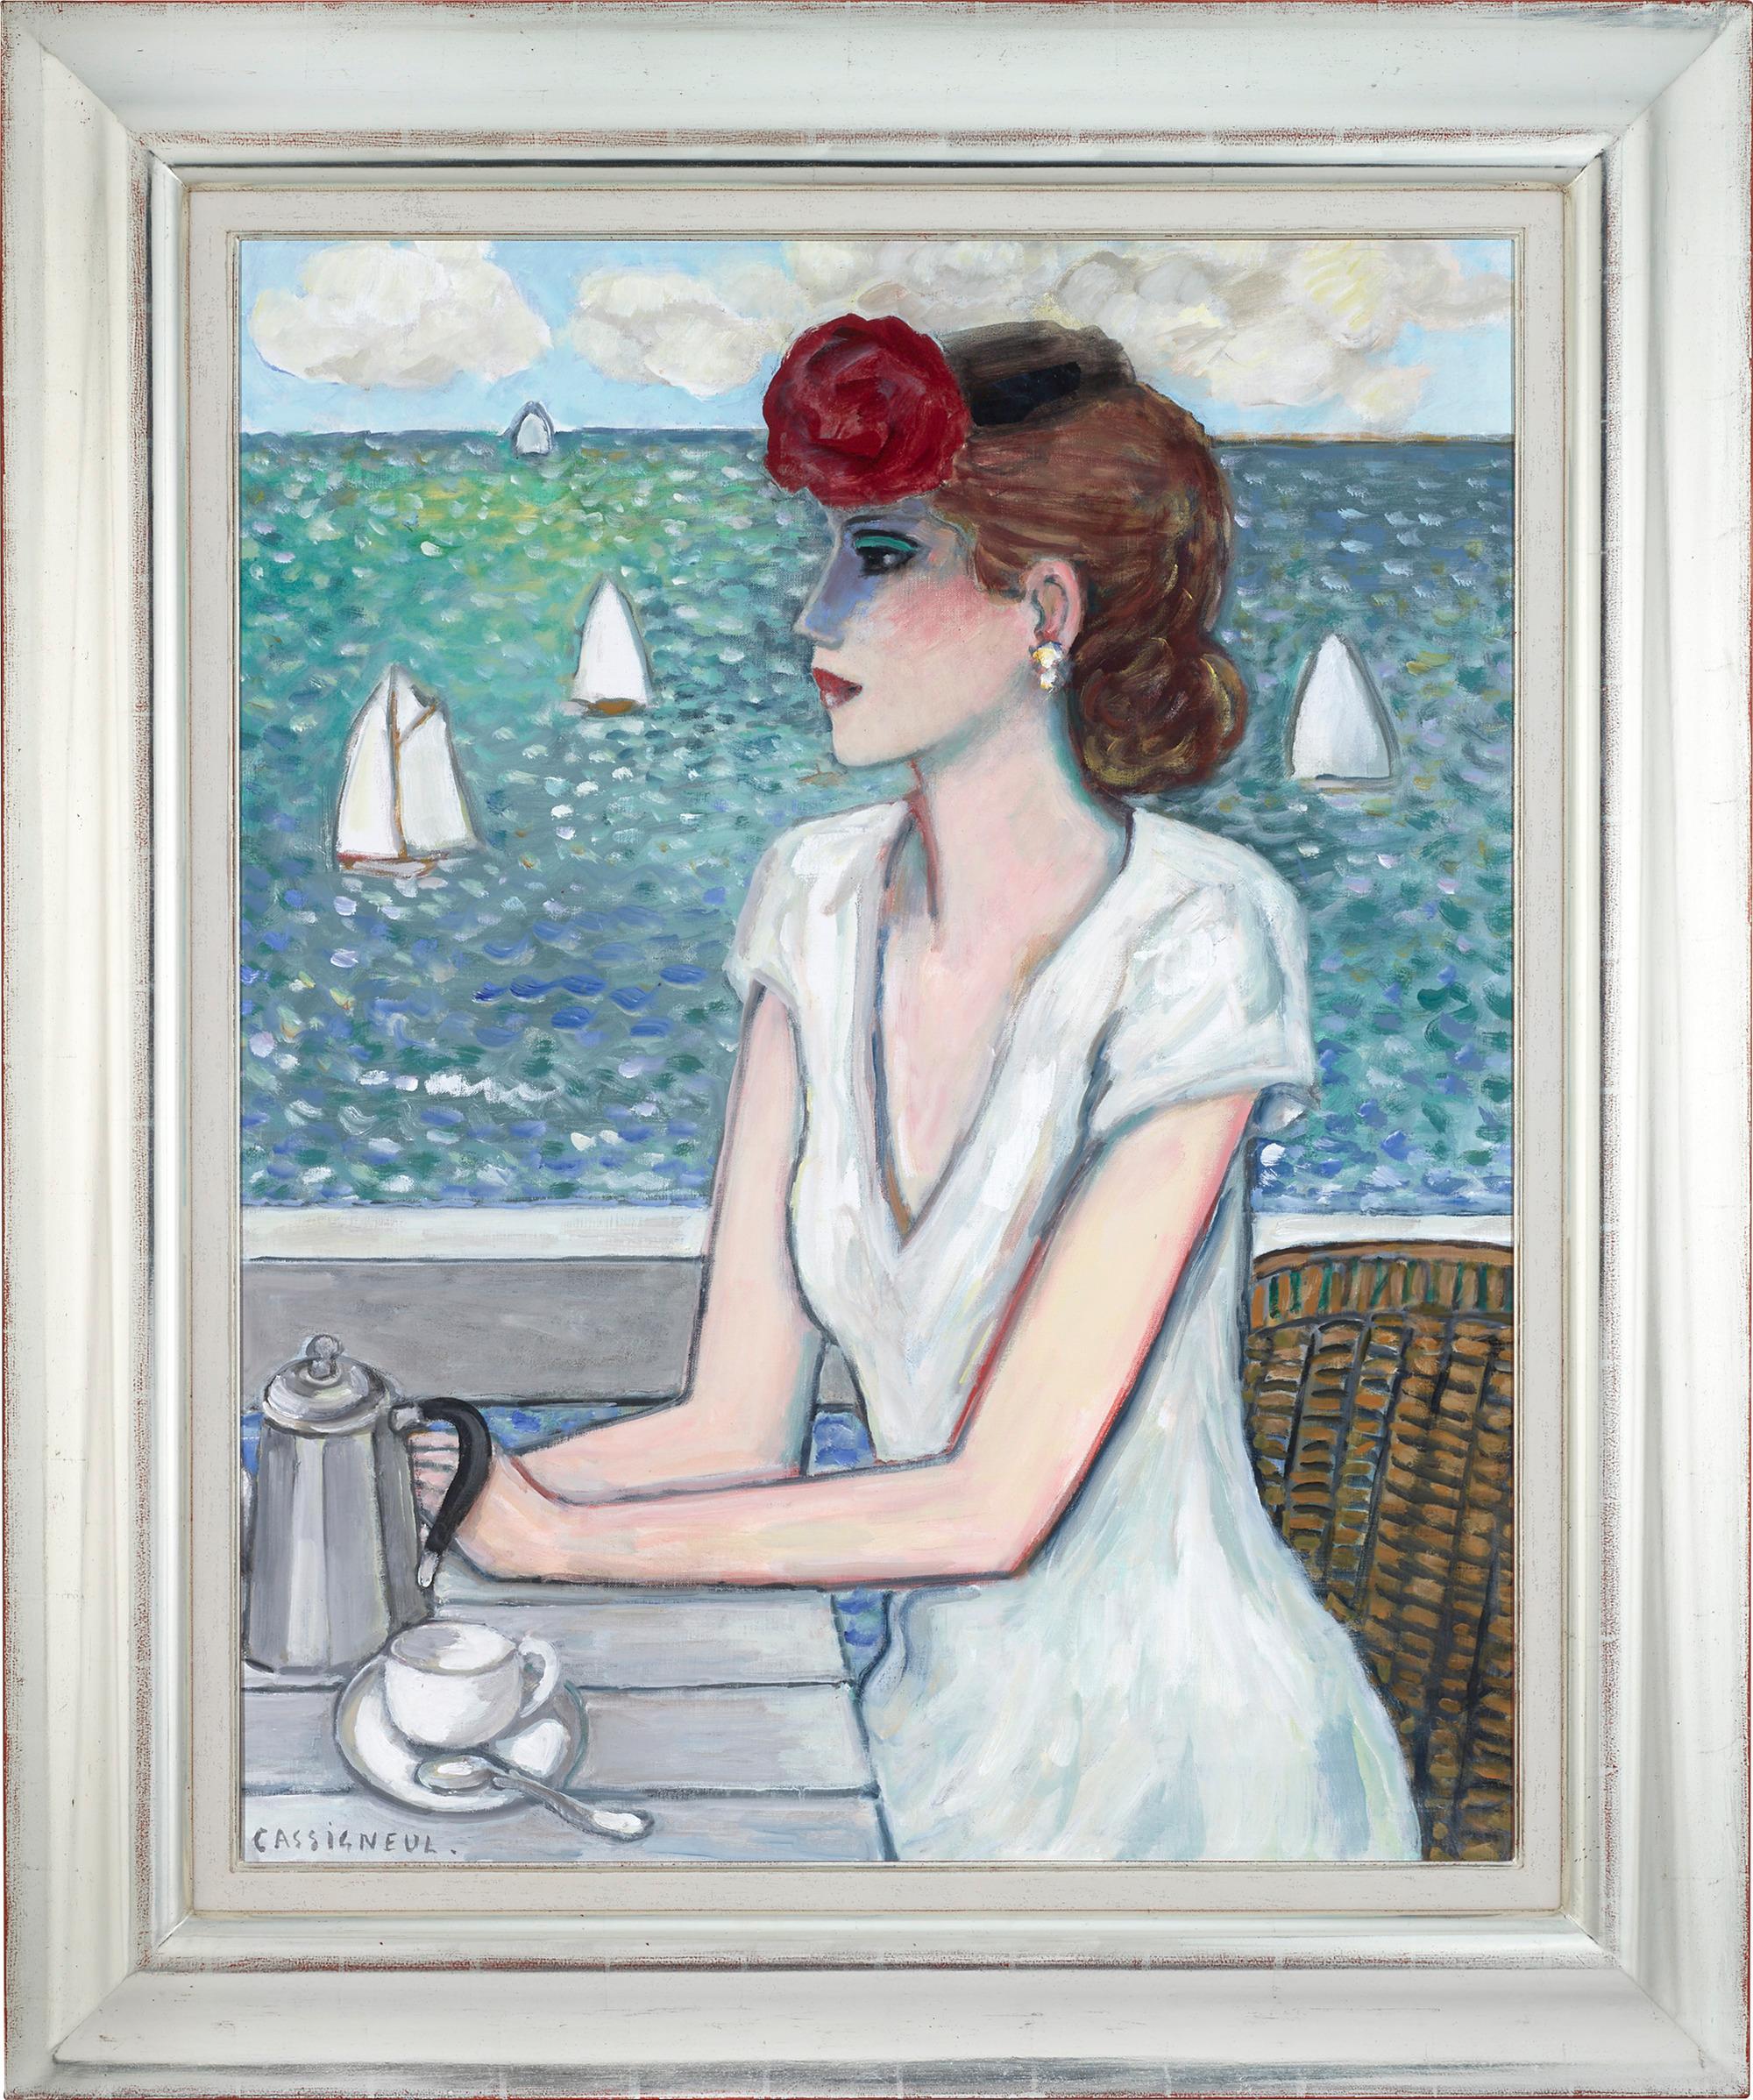 Premier rendezvous (First Date) - Painting by Jean-Pierre Cassigneul